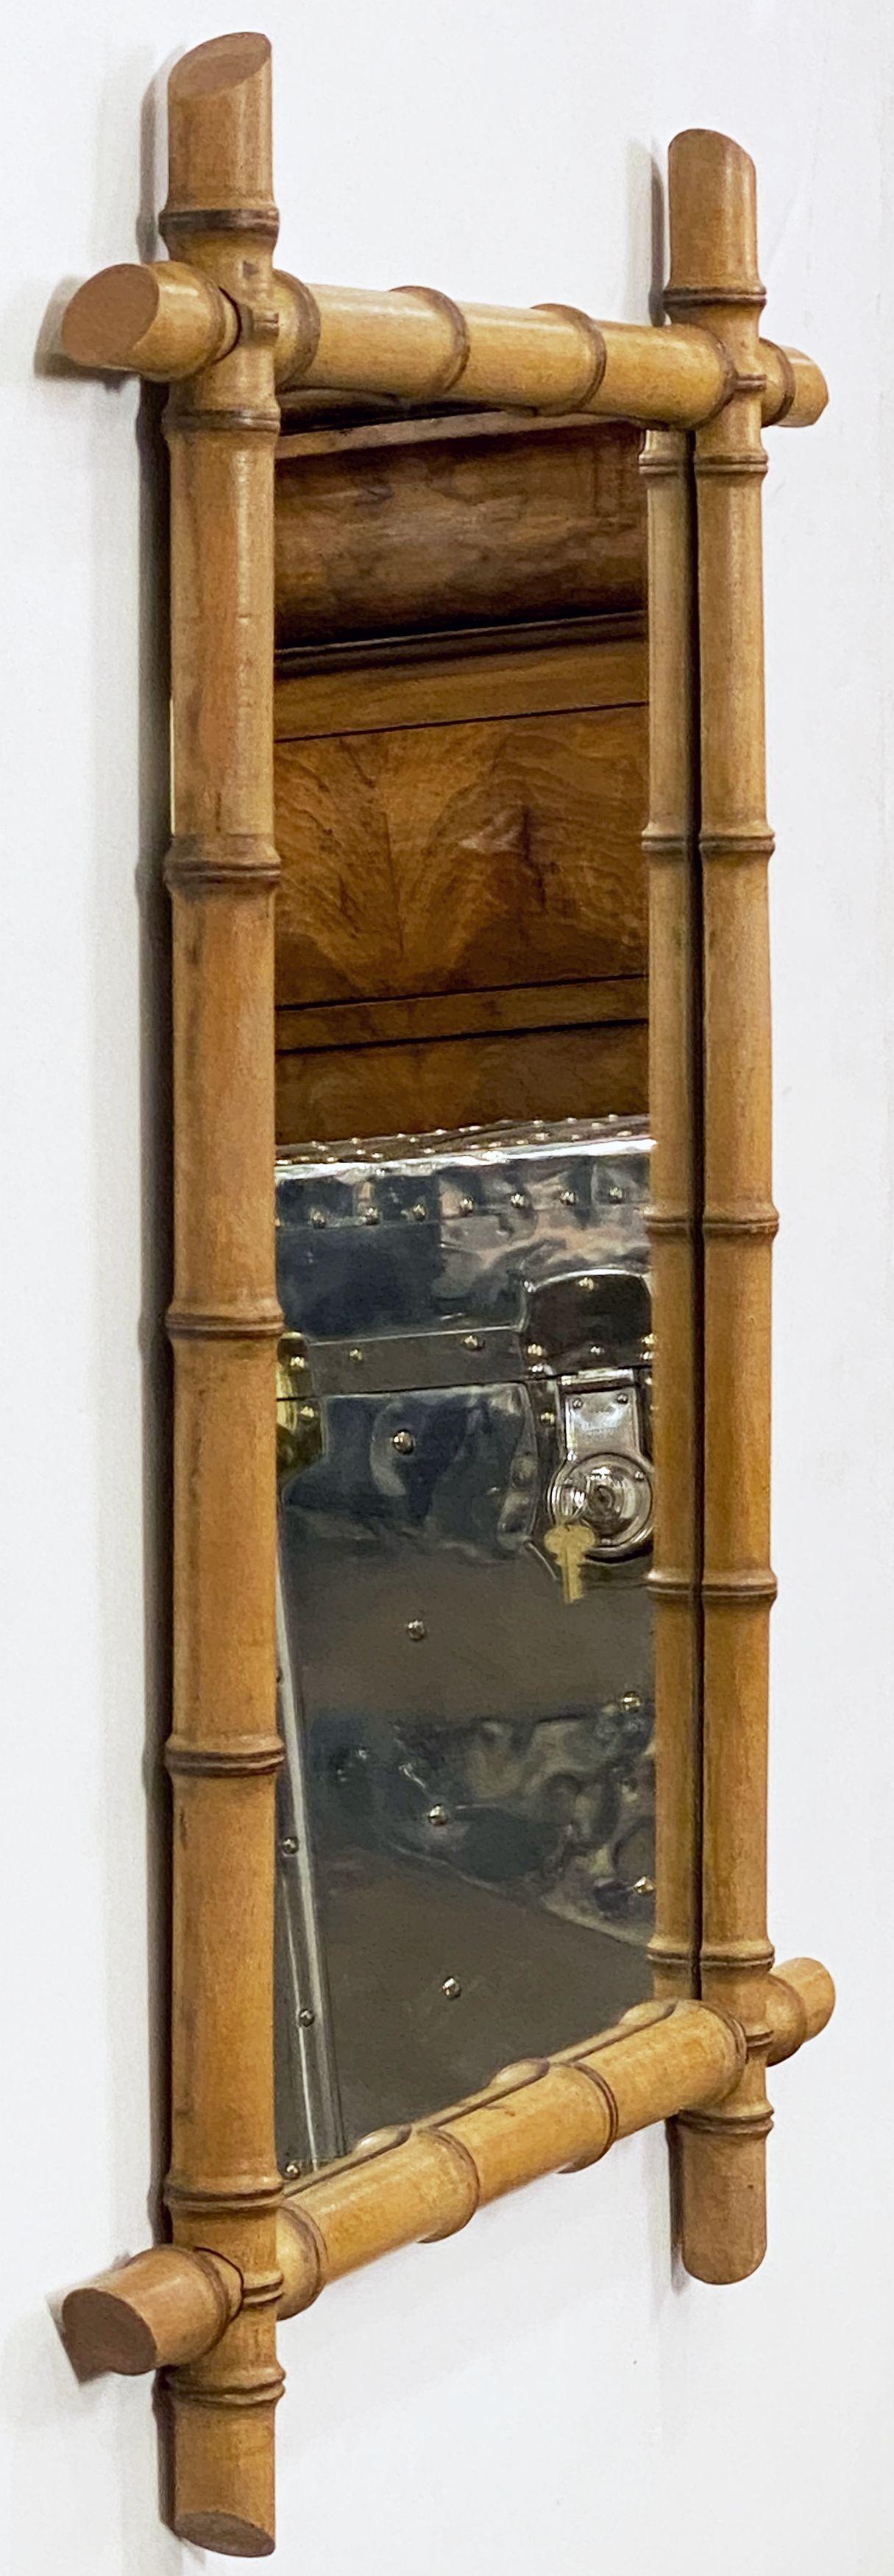 A large French rectangular faux-bamboo mirror from the early 20th century, featuring a turned faux bamboo rectangular frame with intersecting corners surrounding a central mirror plate. Can be displayed vertically (portrait) or horizontally